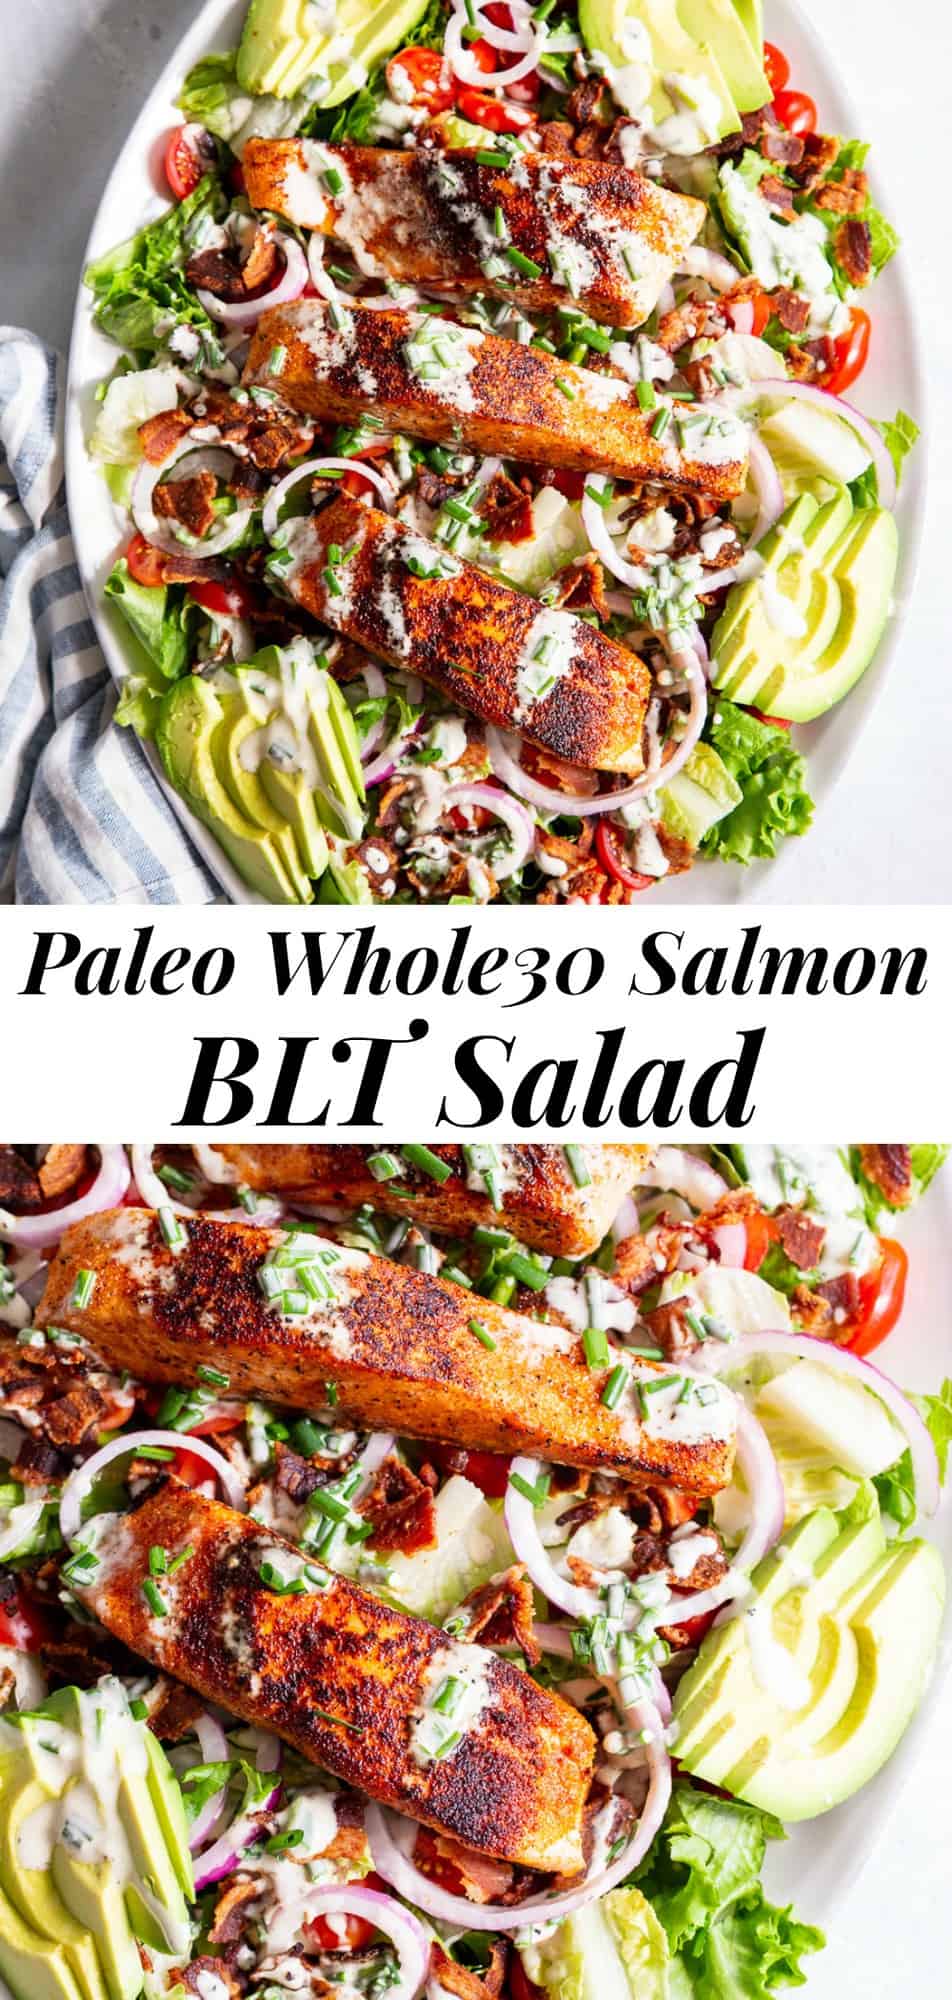 This Salmon BLT Salad is a family favorite and perfect for summer grilling or anytime of year!  Perfectly seasoned salmon is either pan fried or grilled and layered with greens, crispy bacon, avocados and tossed in a Whole30 compliant chive ranch dressing.  This salad makes a hearty meal that even the kids will love! It’s paleo, low carb, and keto friendly too! #paleo #salmon #cleaneating #whole30 #keto #lowcarb